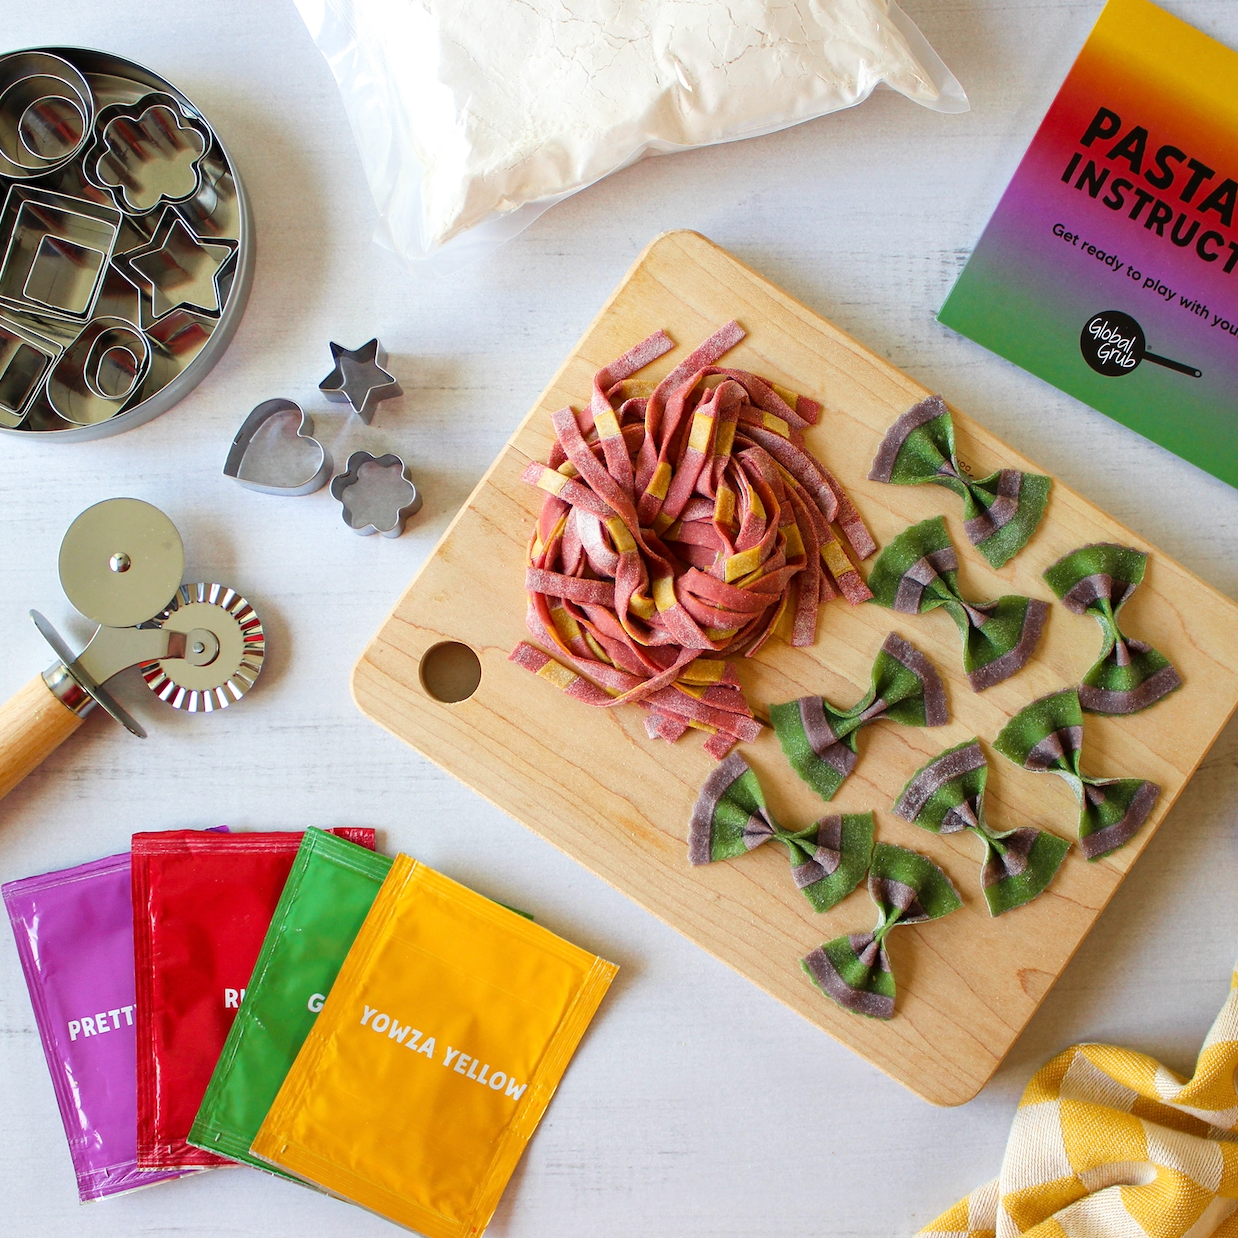 Pasta Art Kit  Make Creative Pasta with Colors from Nature – Global Grub